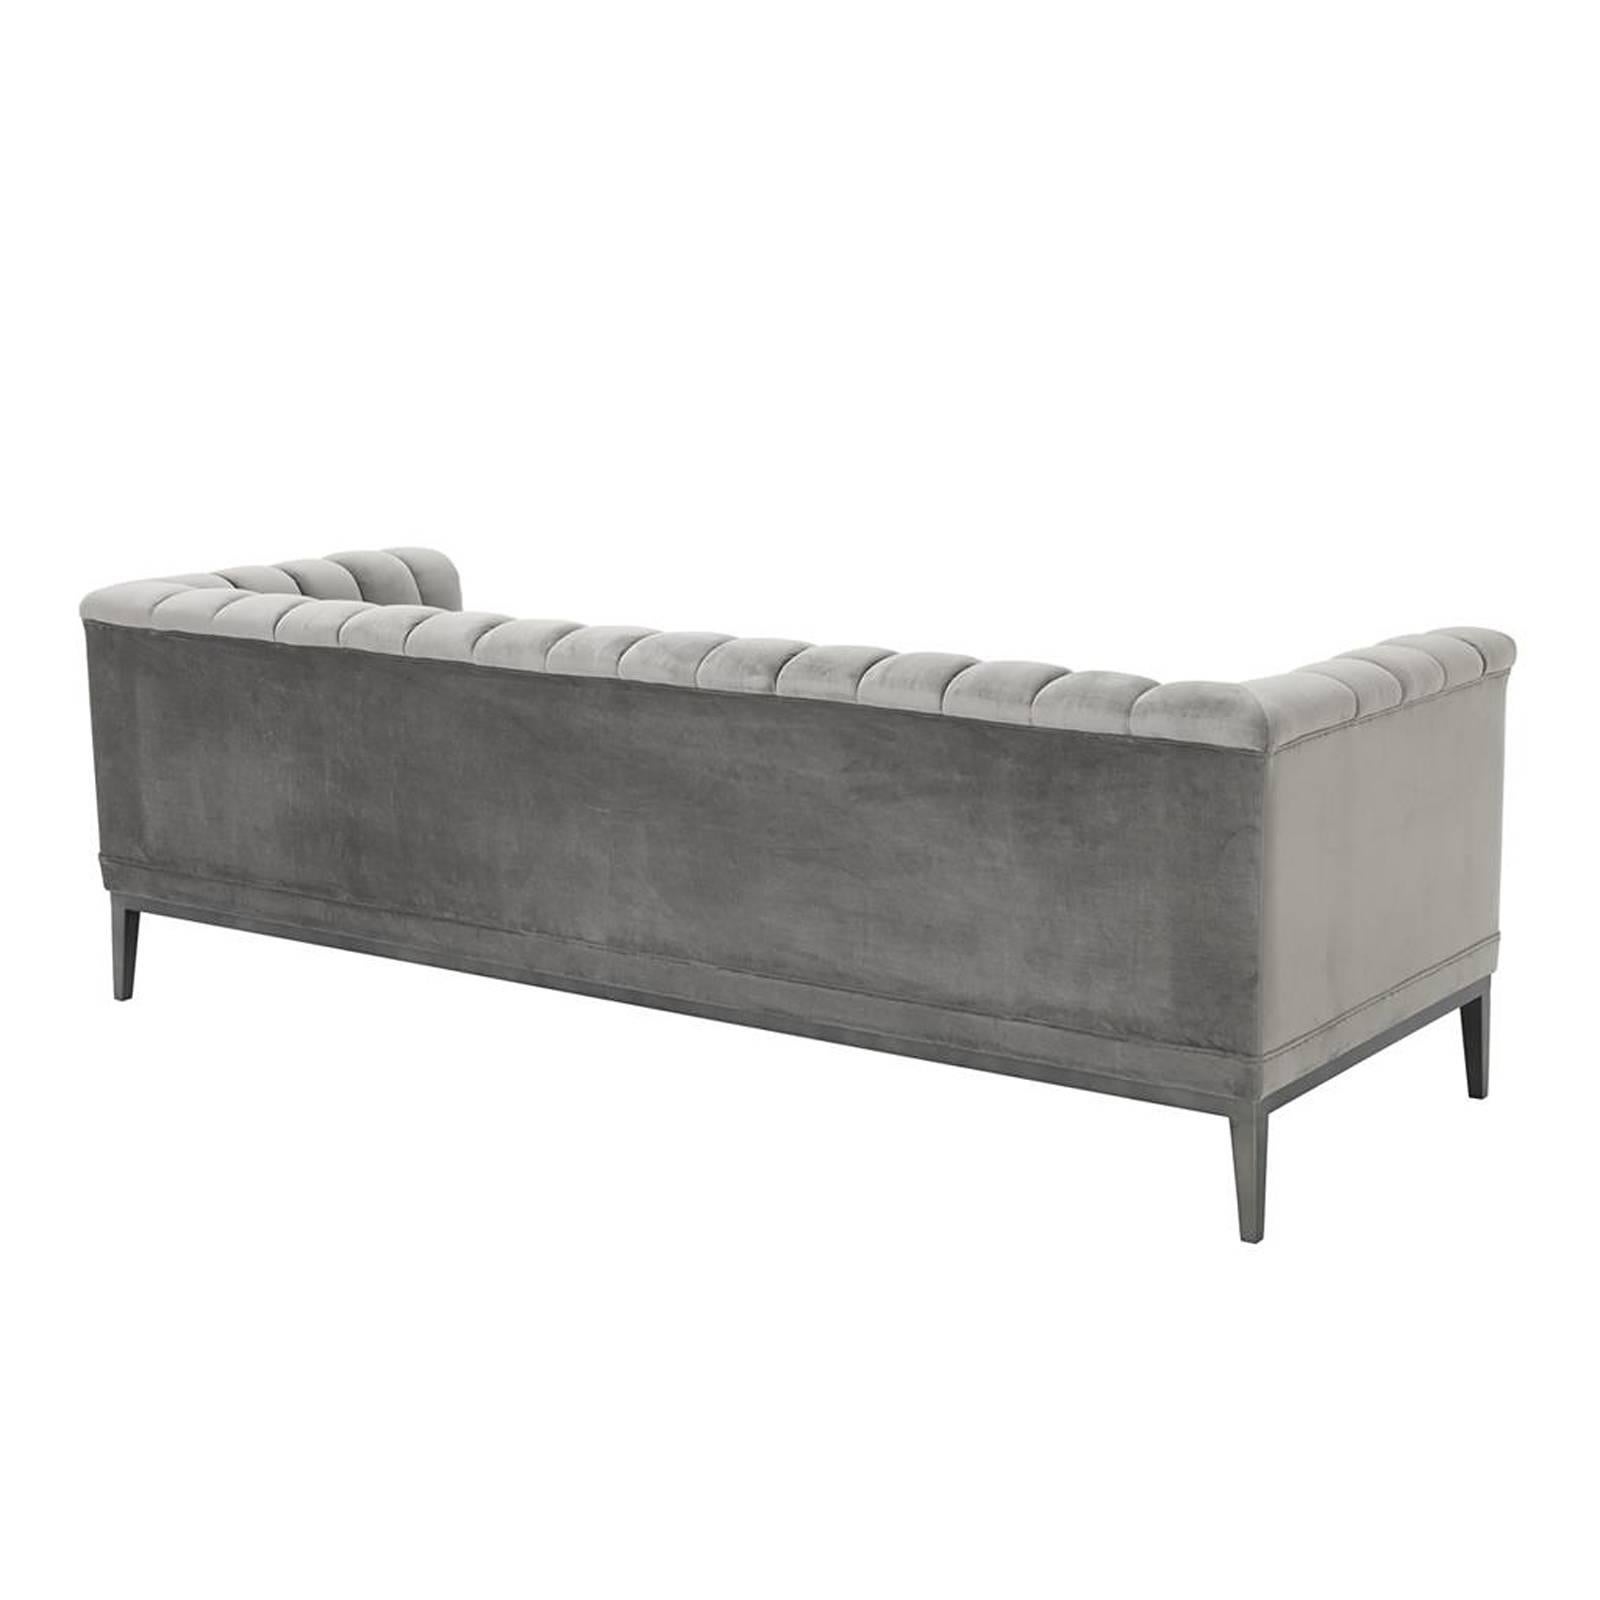 Hand-Crafted Stepper Sofa with Porpoise Grey Fabric